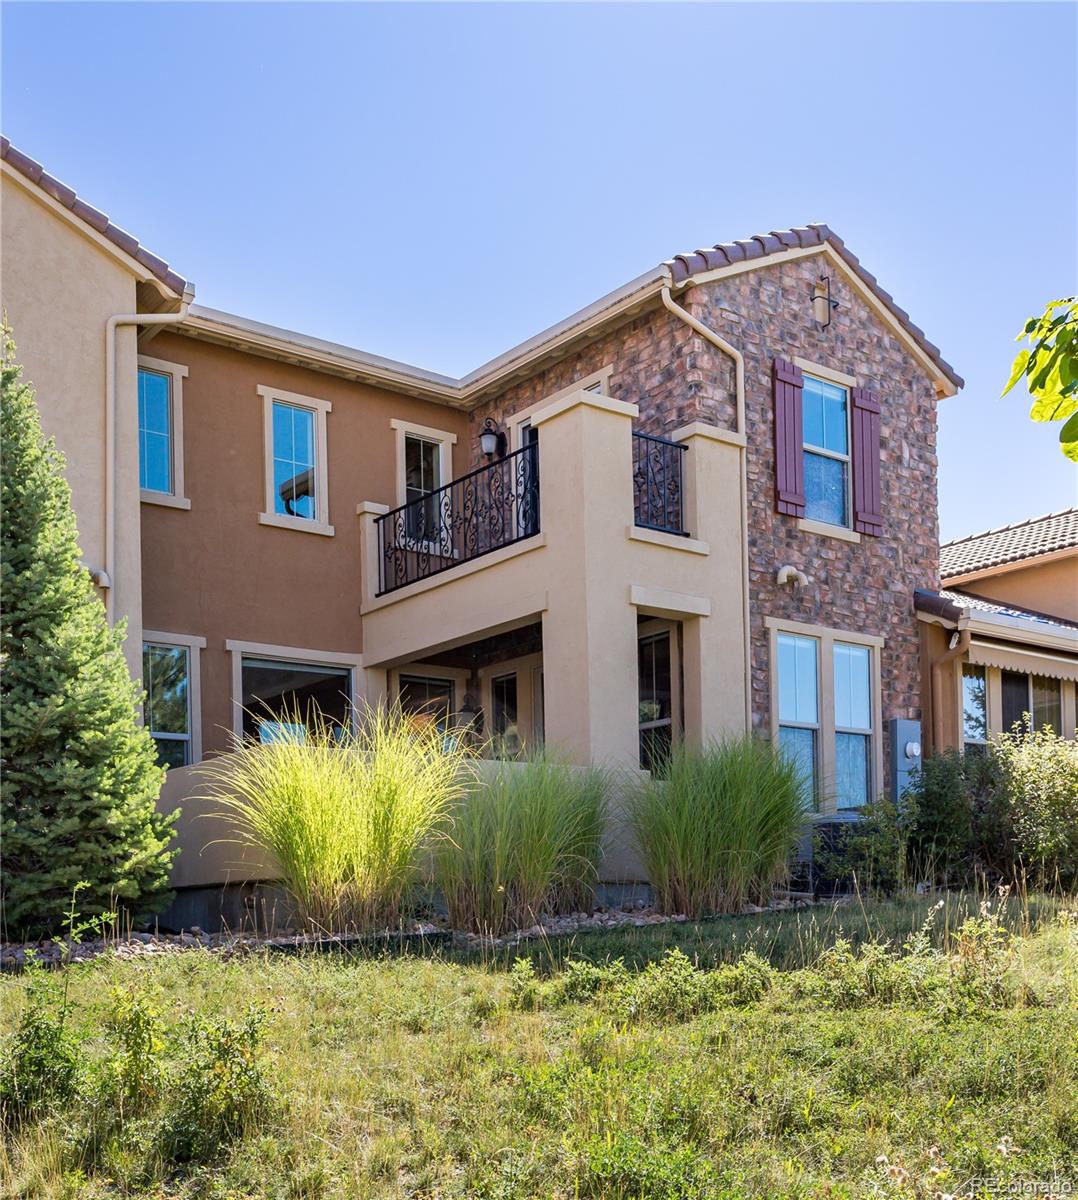 Report Image for 9600  Firenze Way,Highlands Ranch, Colorado